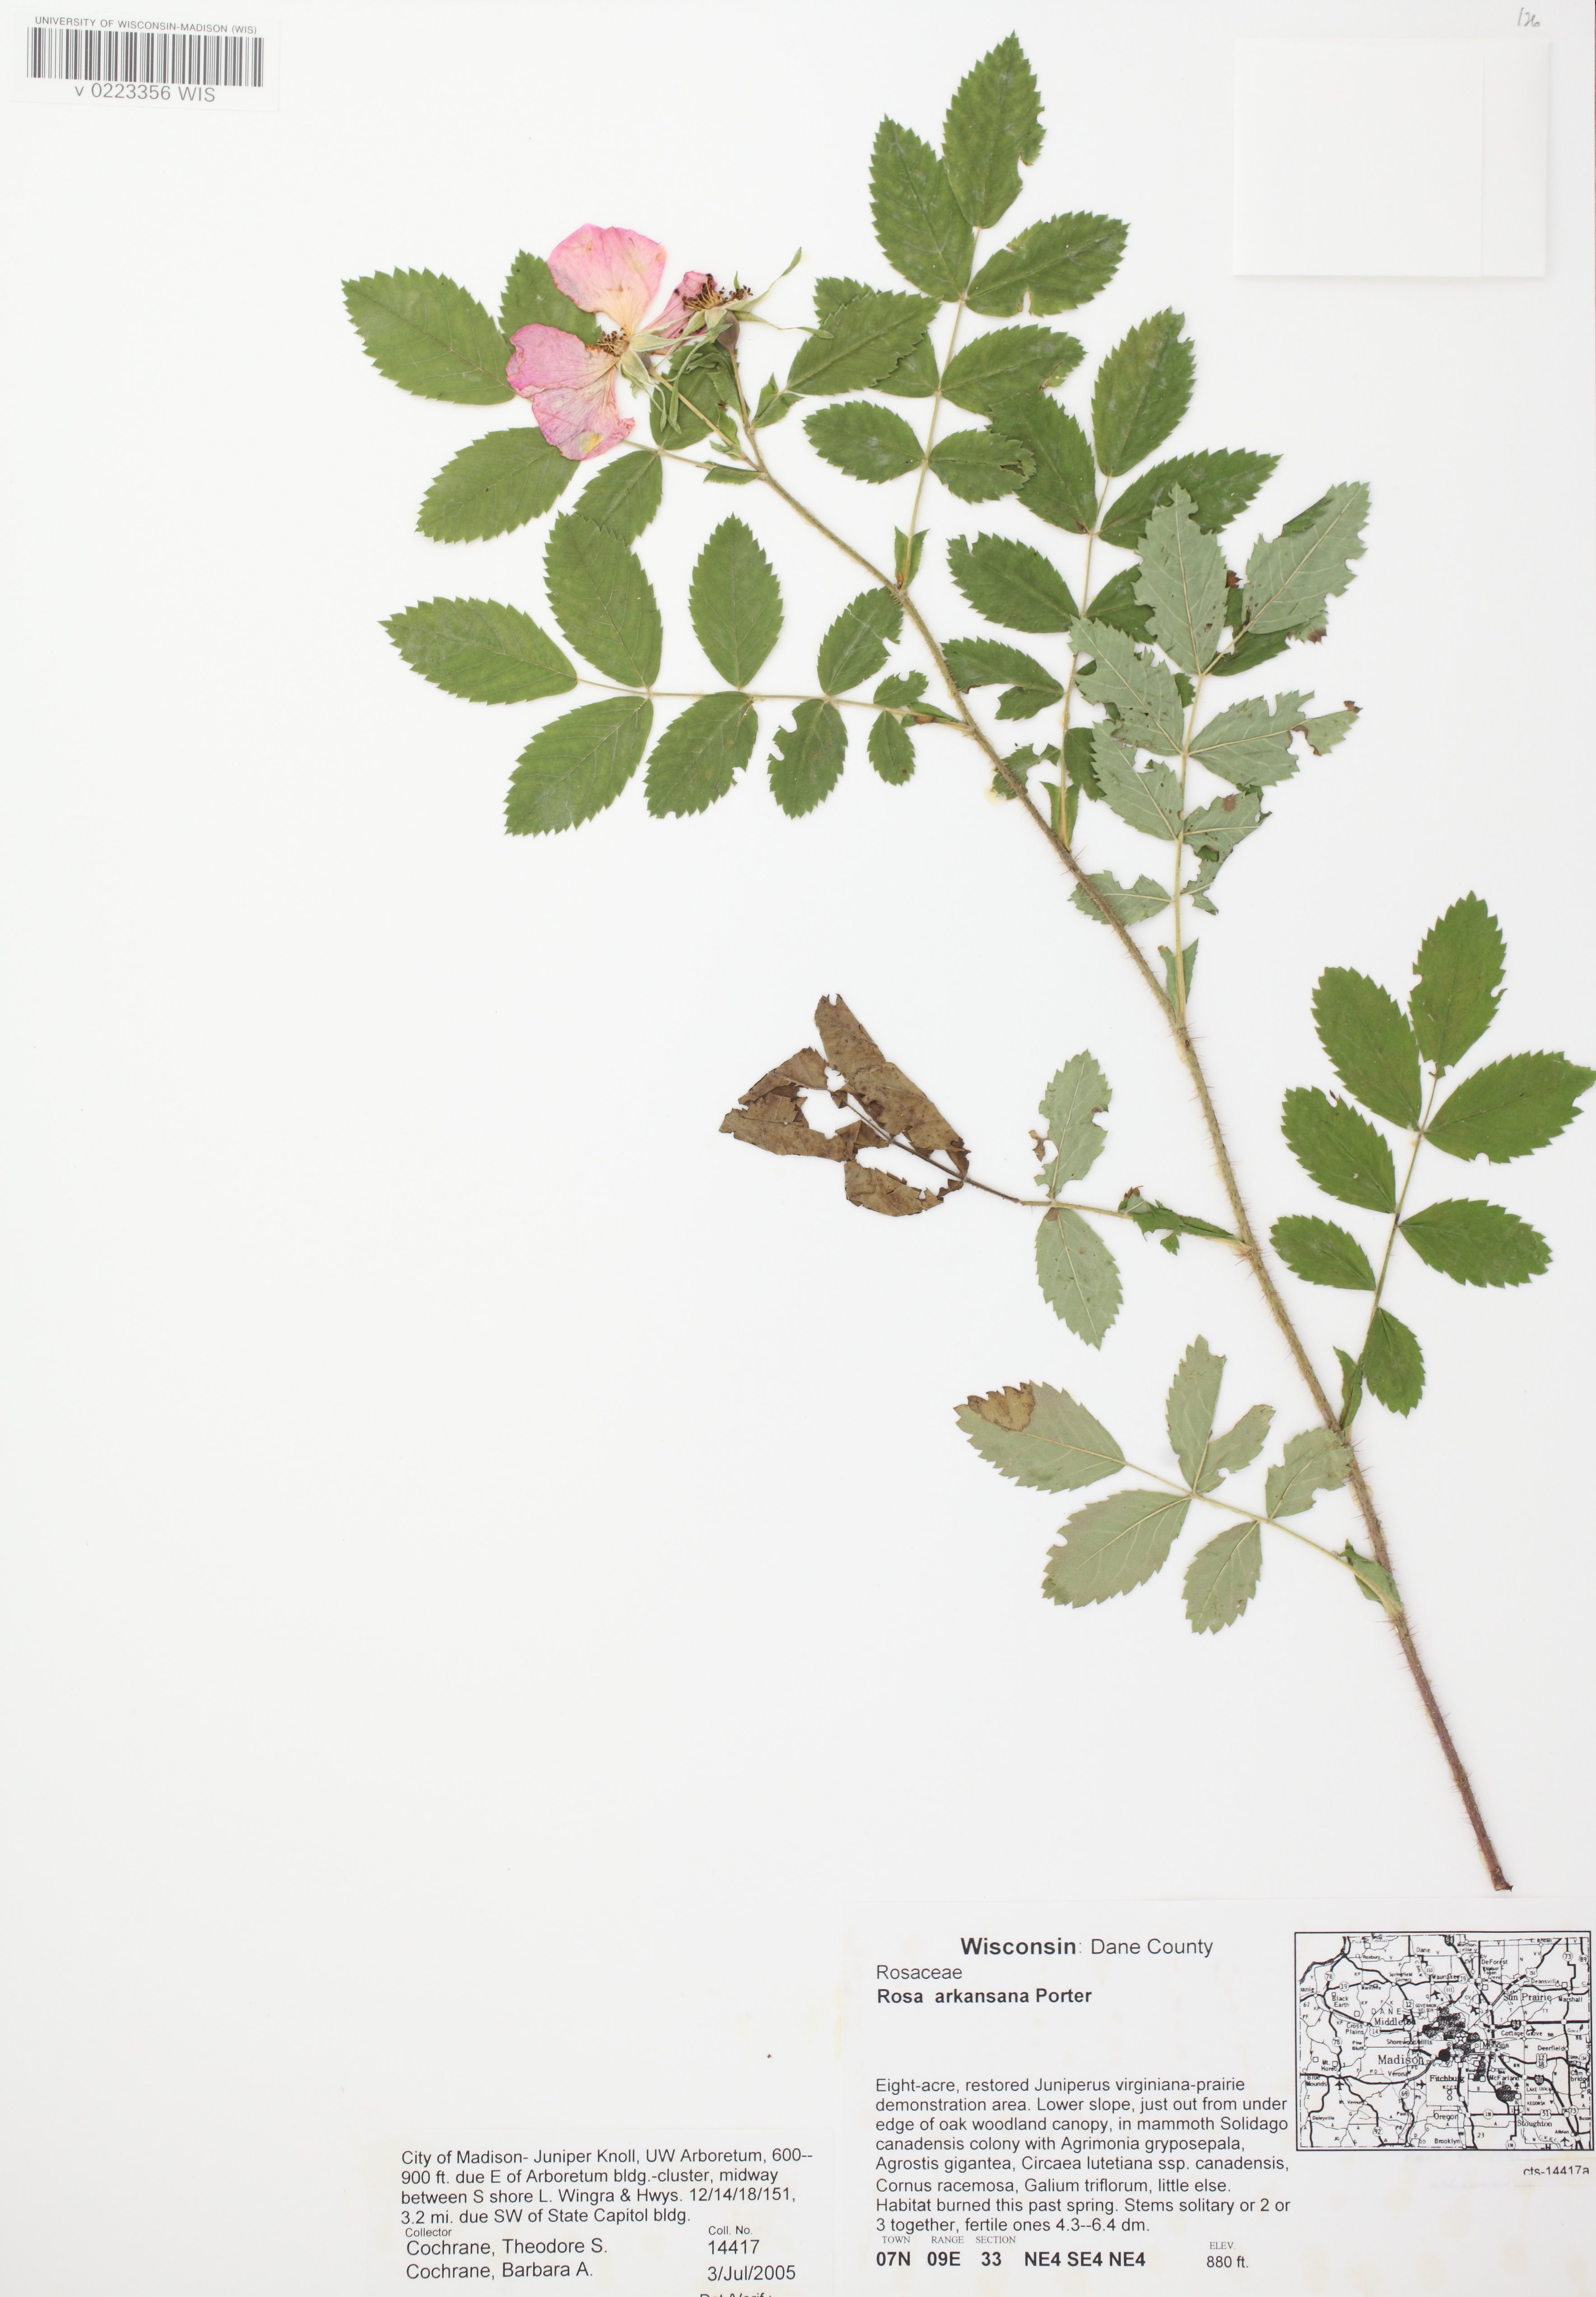 Prairie Rose (Rosa arkansana) specimen collected in city of Madison, Wisconsin on July 3, 2005.